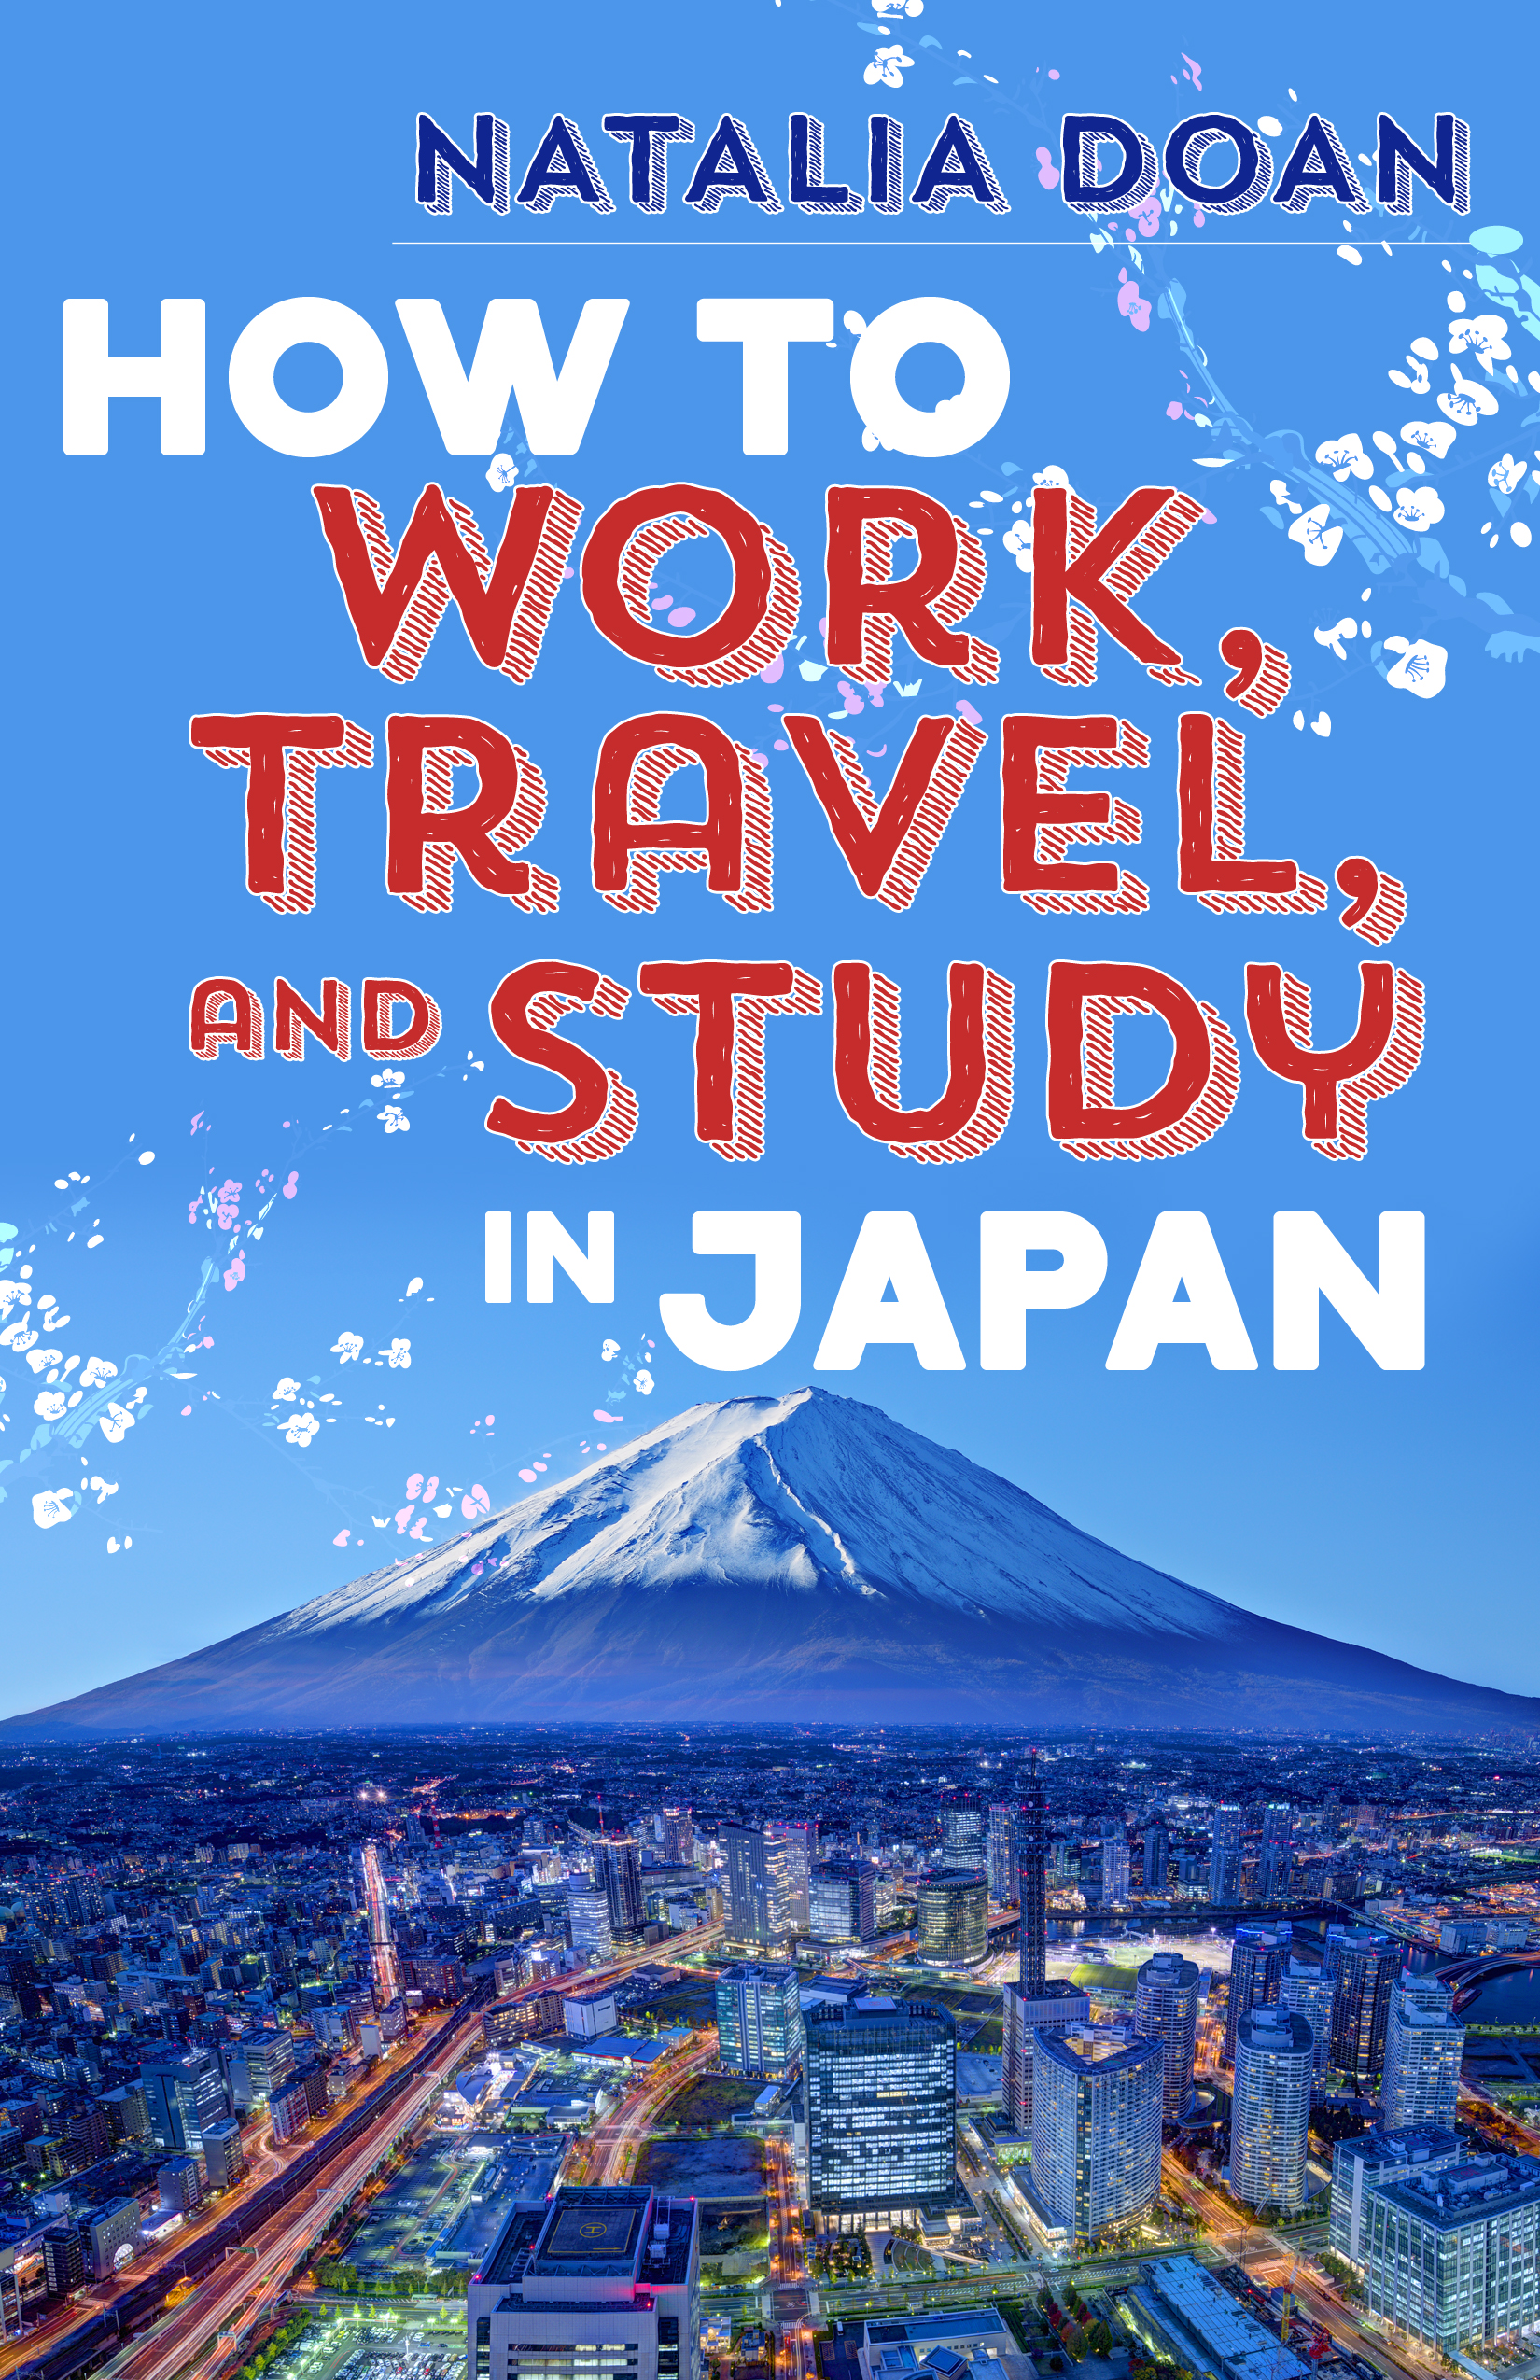 How to work, travel and study in Japan book cover